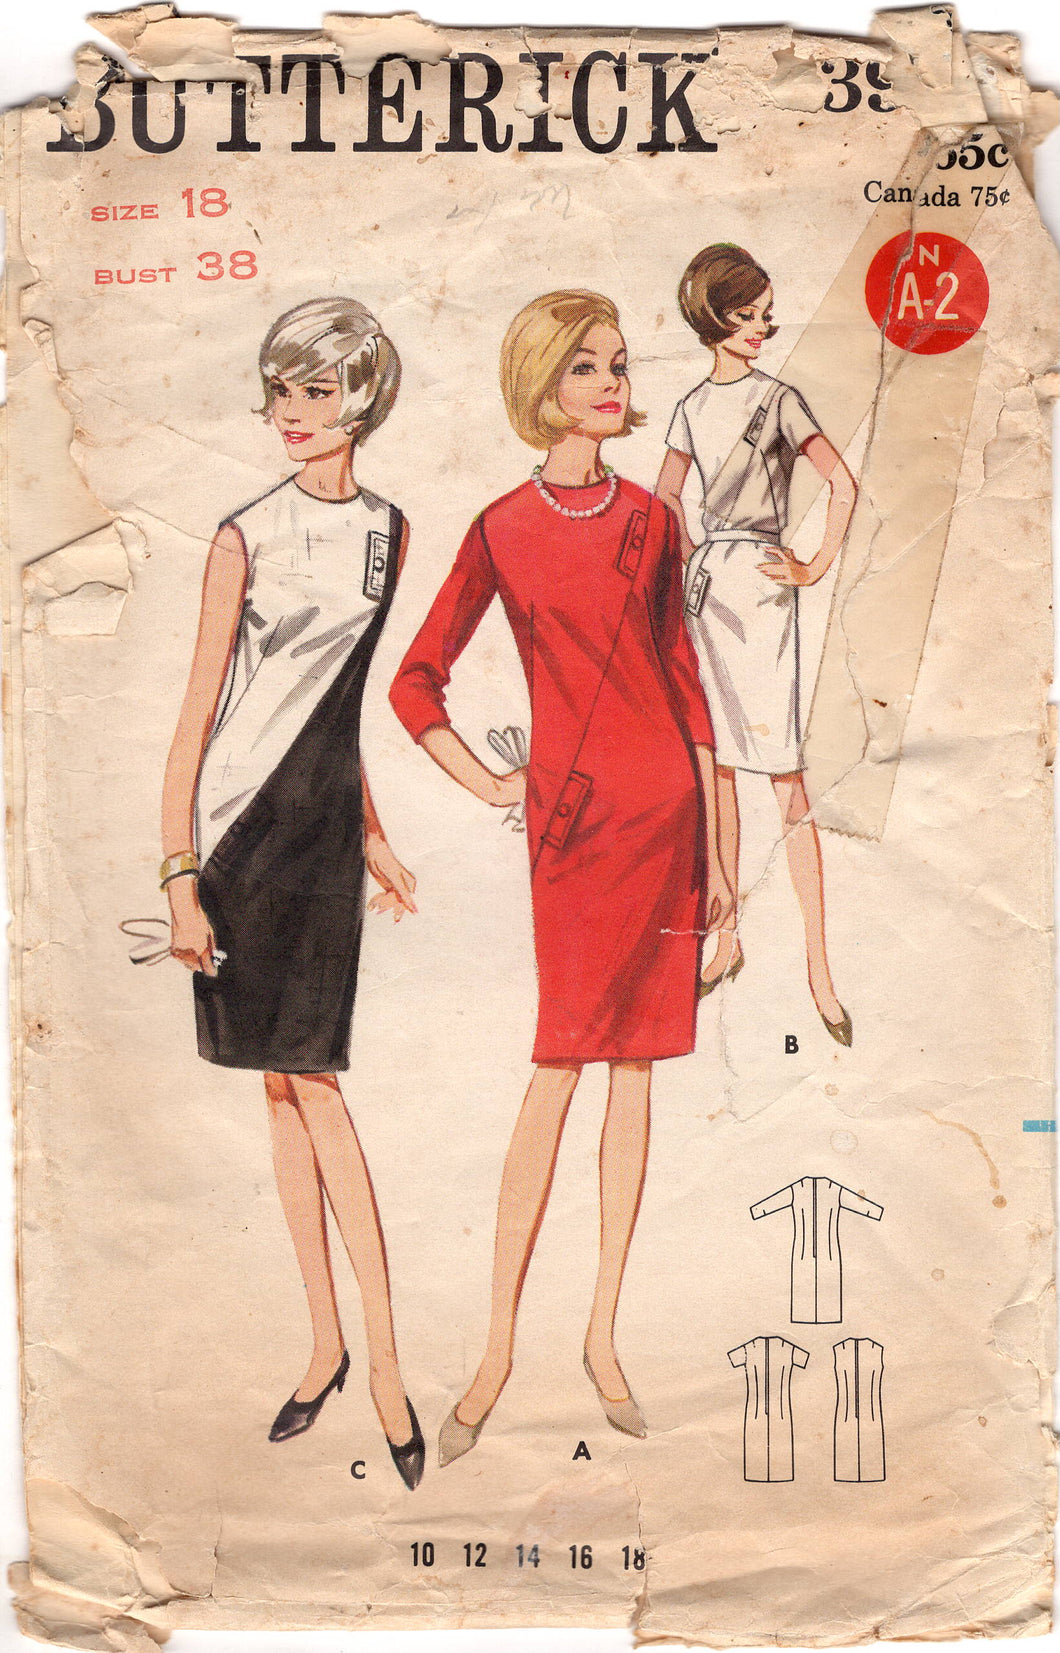 1960's Butterick Shift Dress with Diagonal Front Panel Pattern - Bust 38